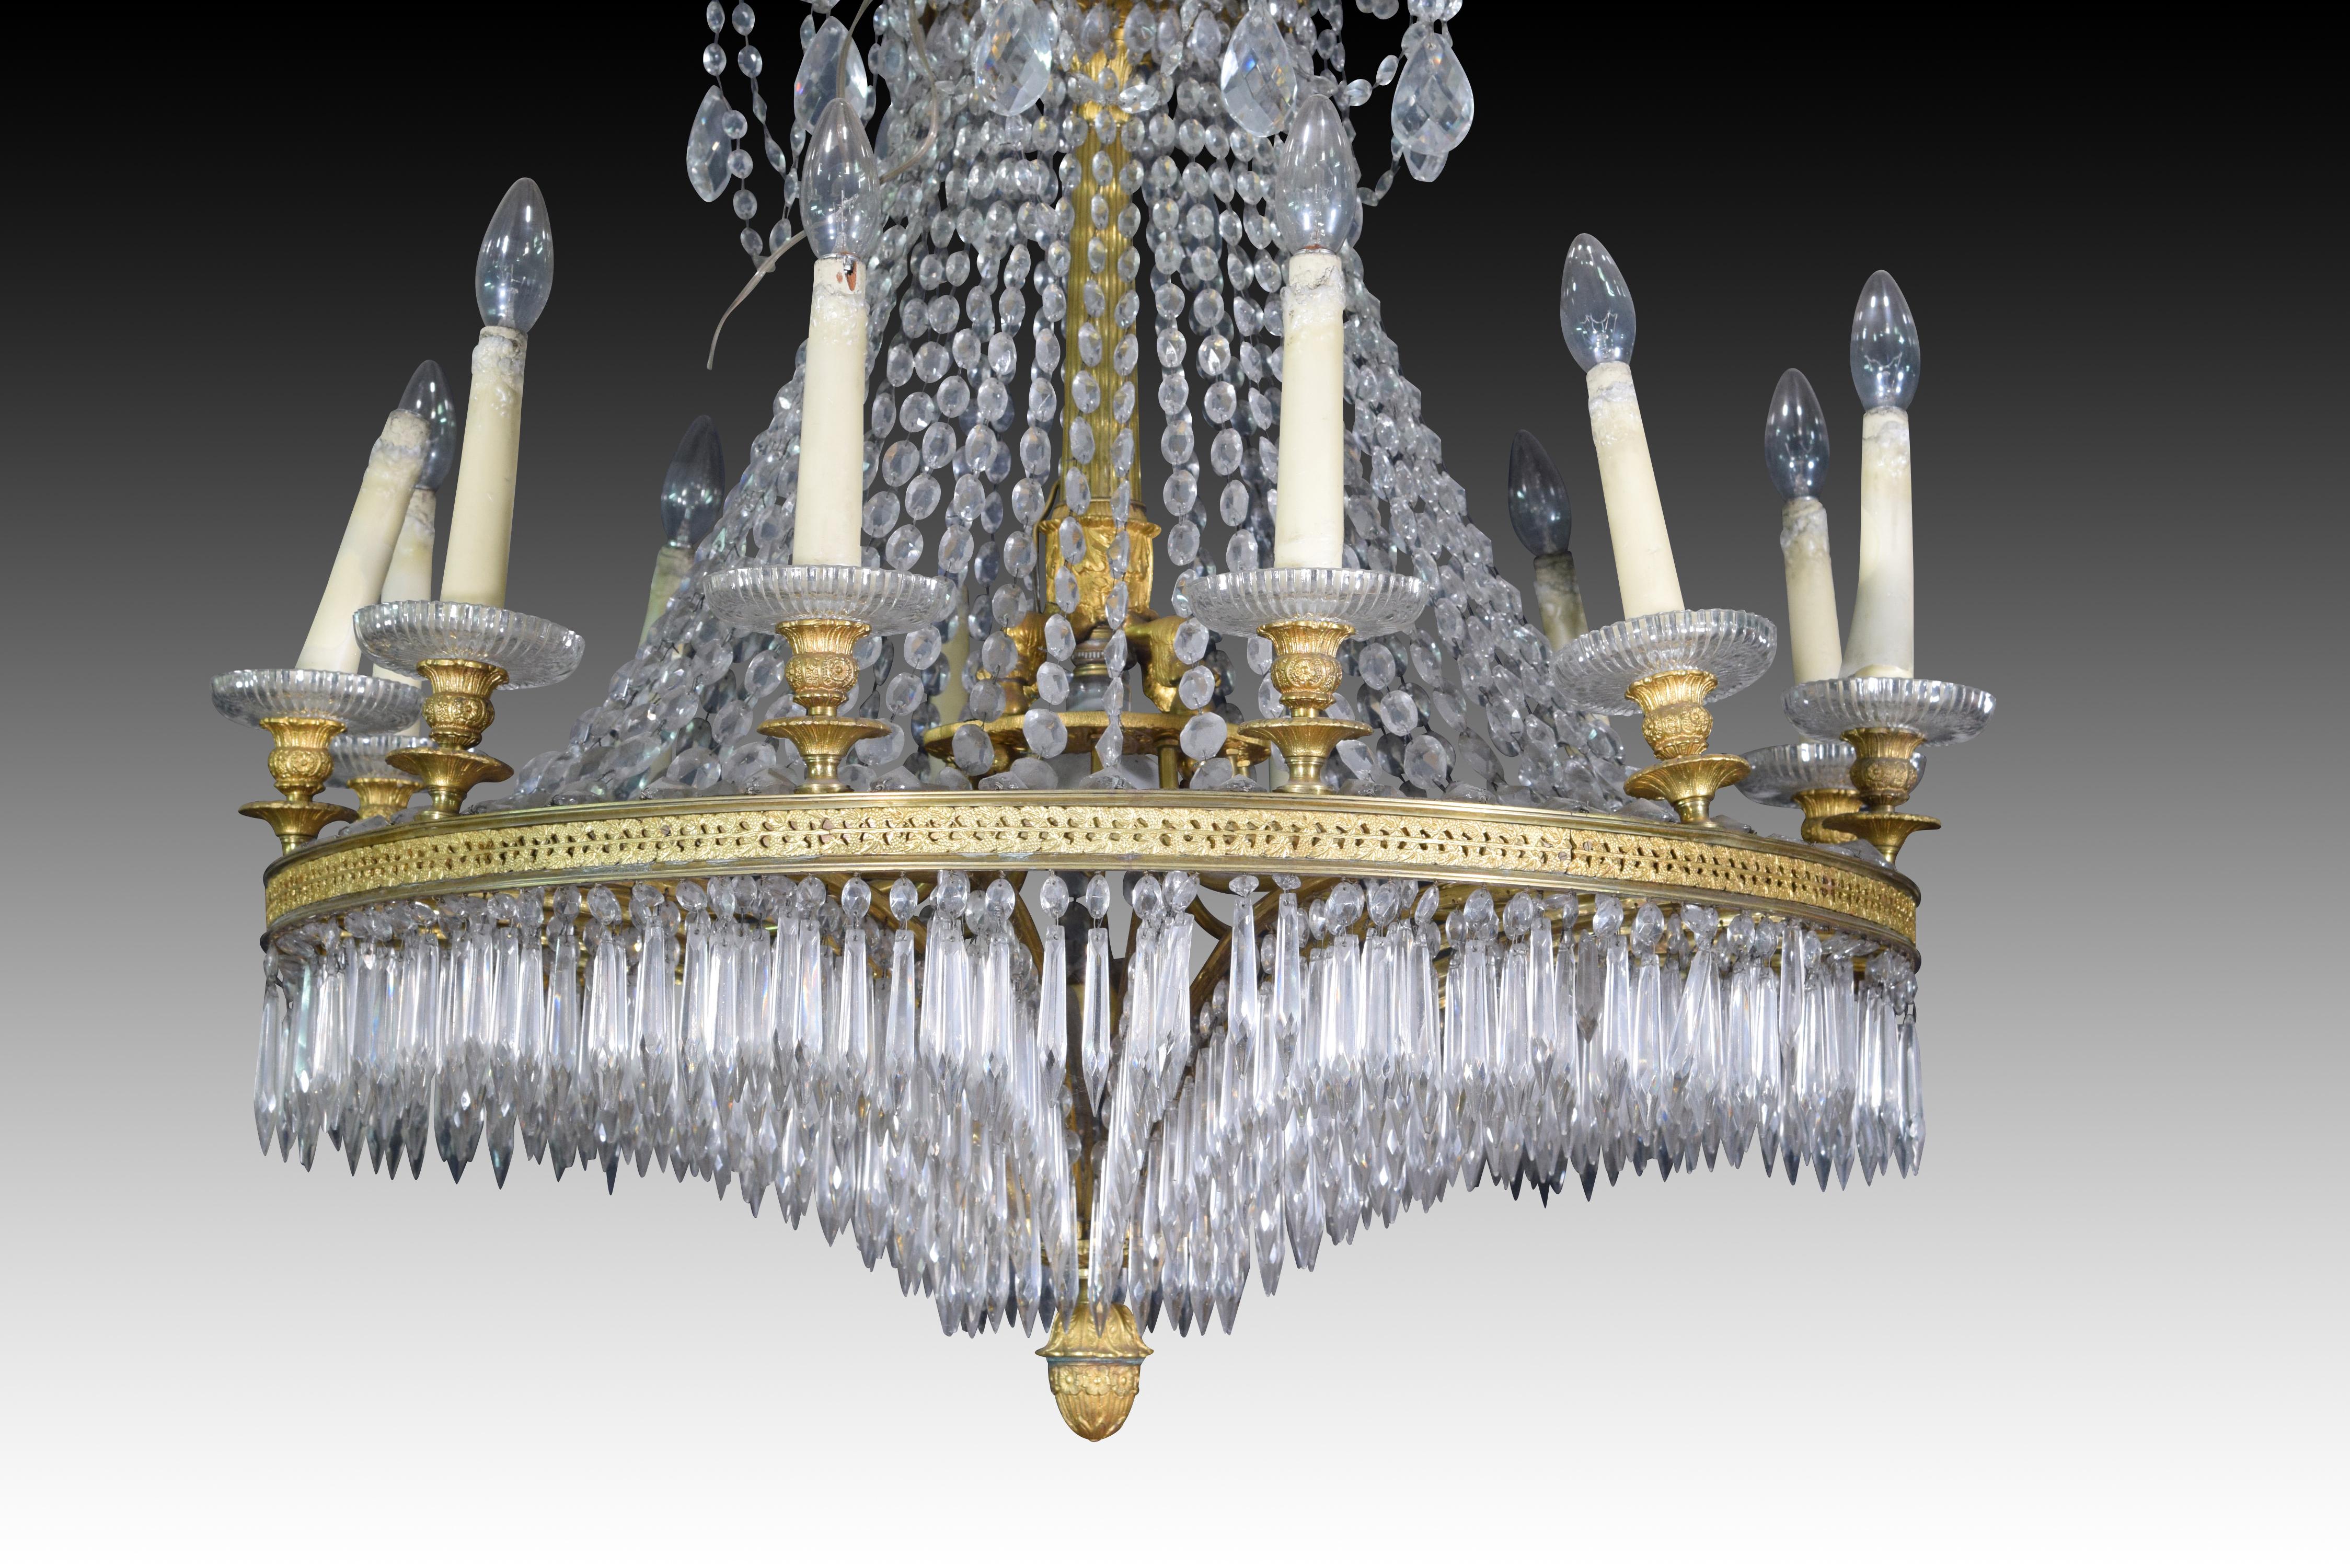 Neoclassical Revival Ceiling lamp, twelve lights. Bronze, glass. 19th century.   For Sale